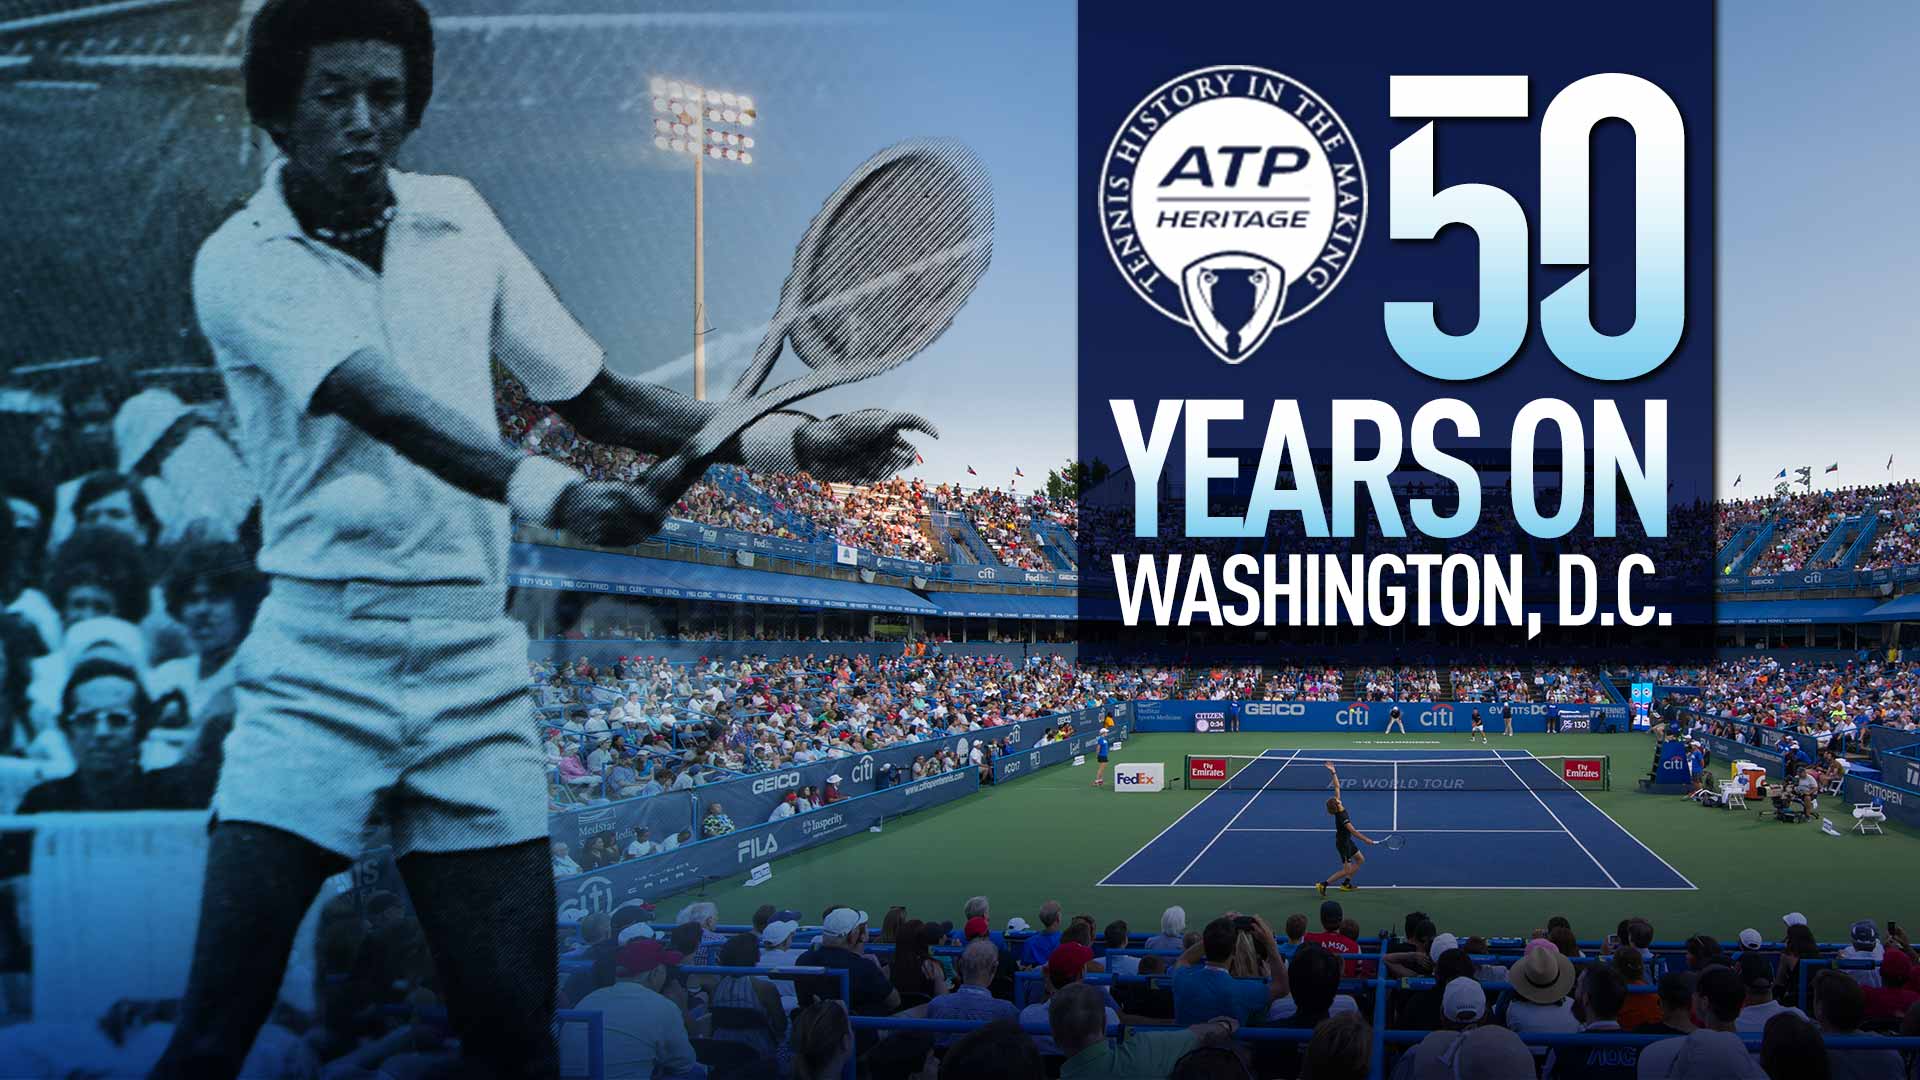 Taking Tennis Outside The Country Club, 50 Years Of Tennis In Washington, D.C